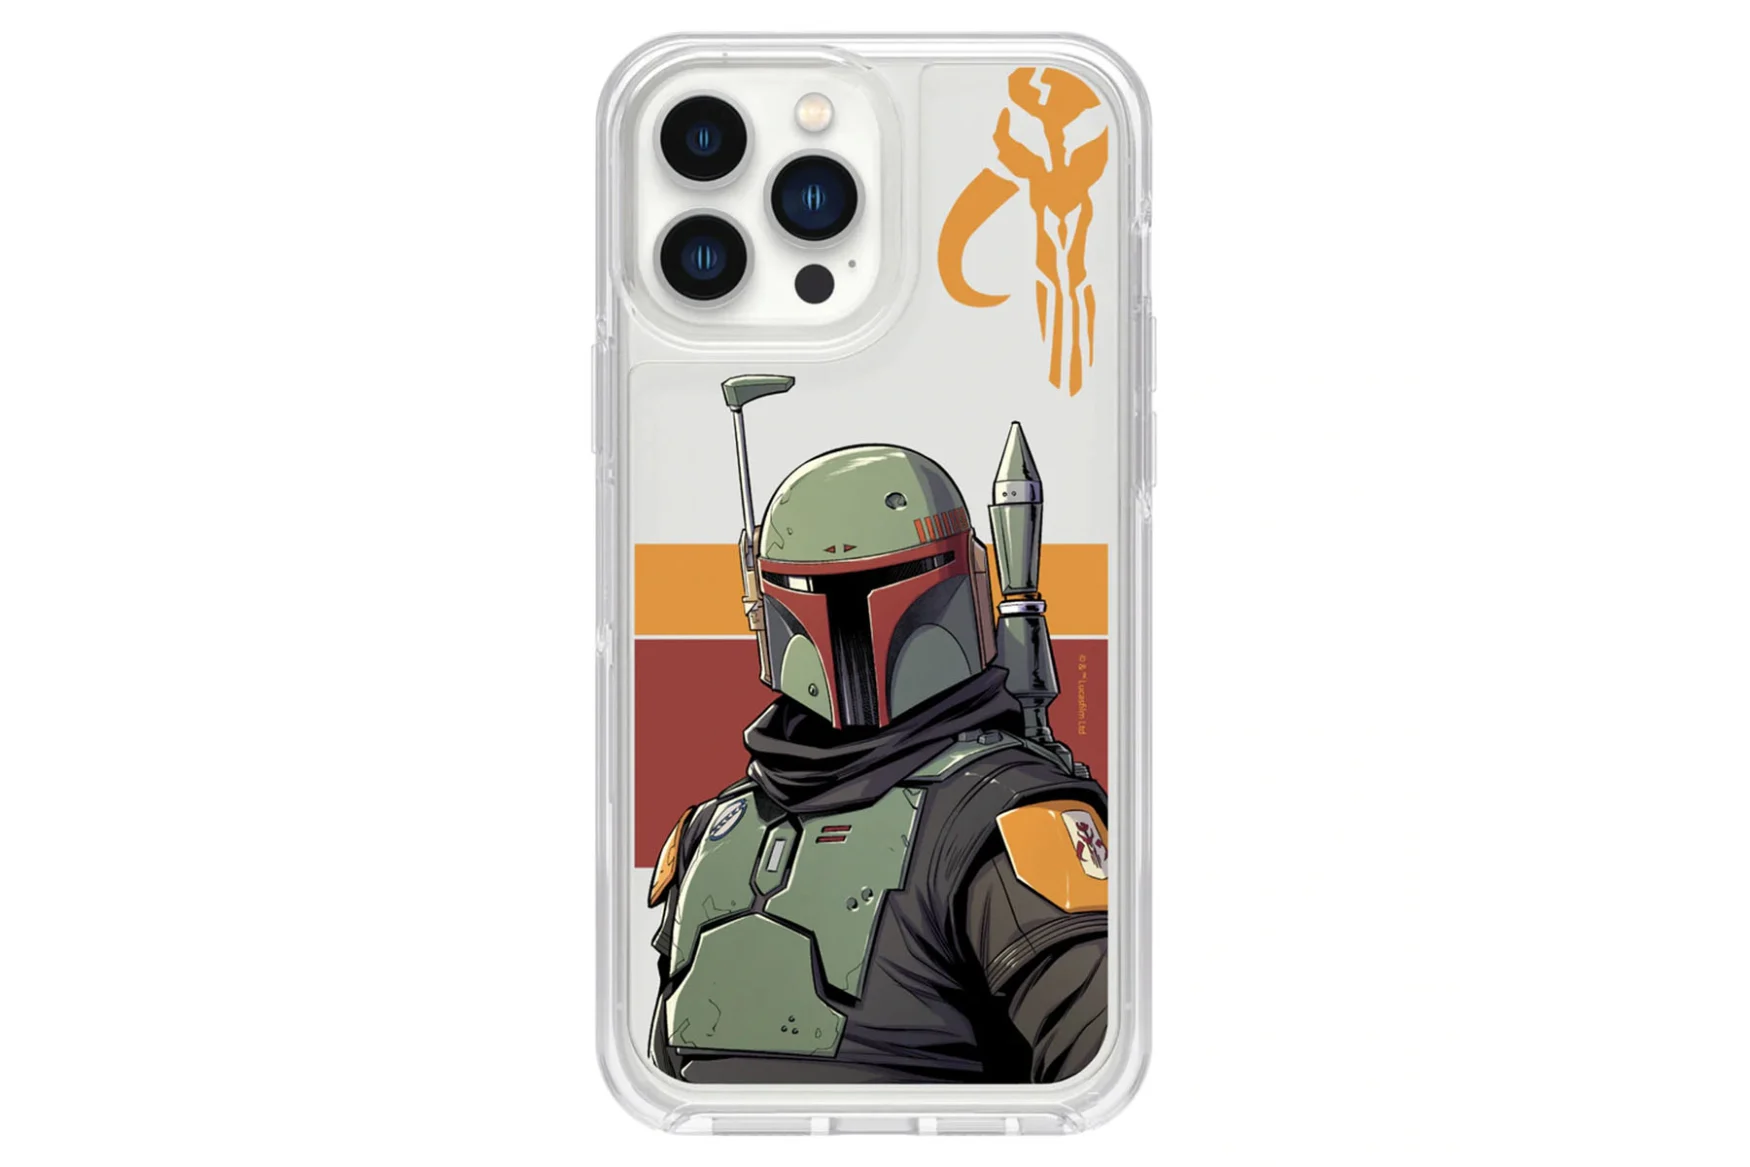 Otterbox Star Wars phone cases